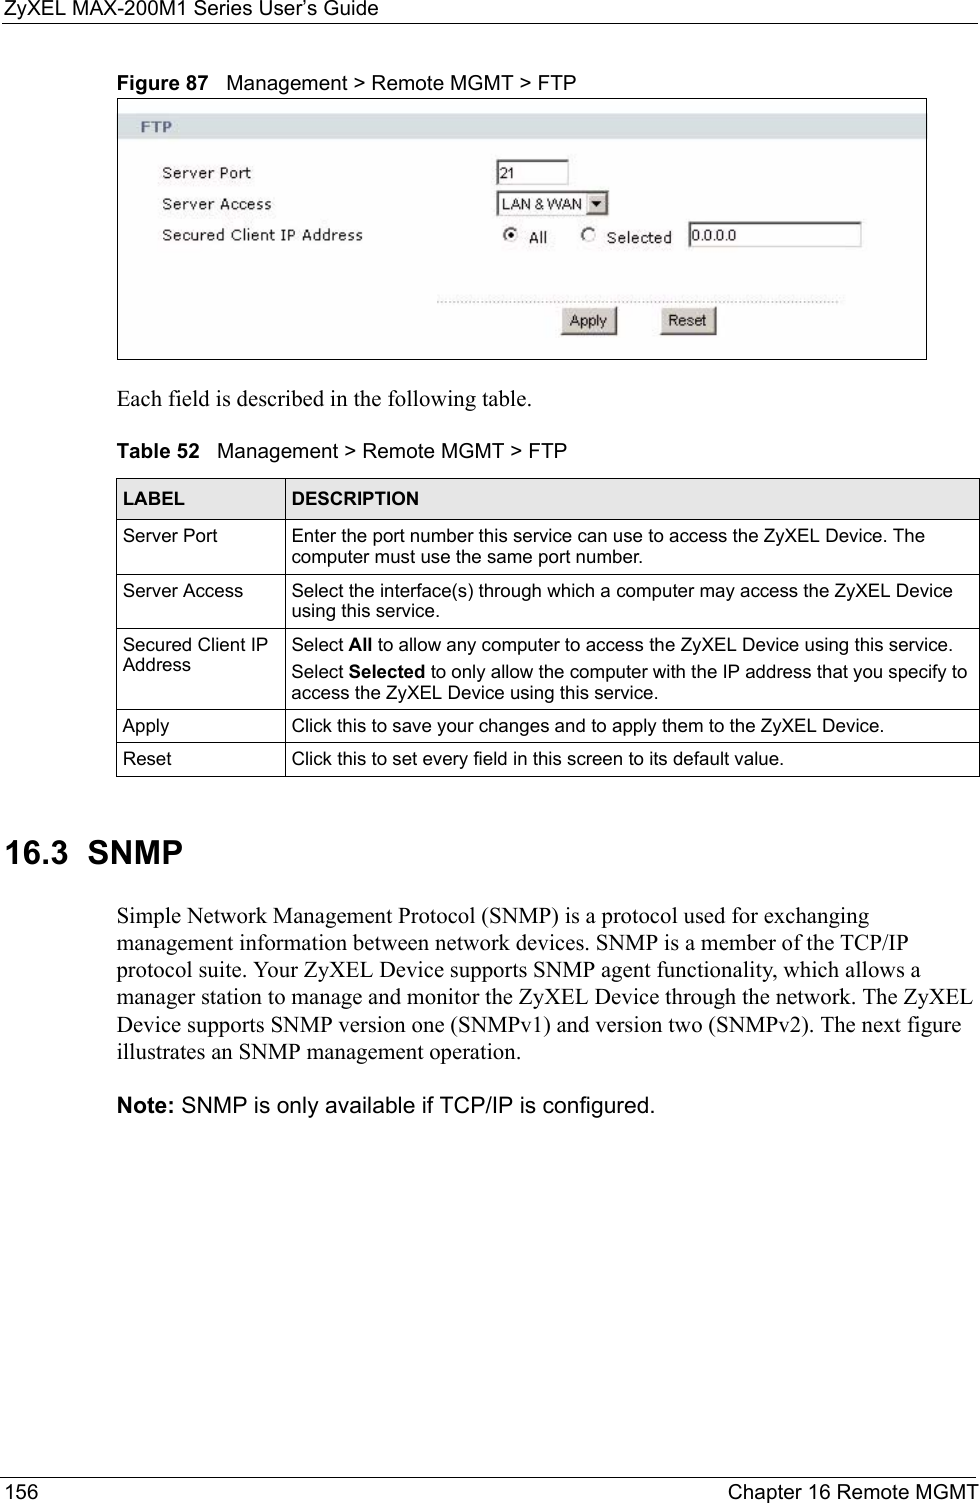 ZyXEL MAX-200M1 Series User’s Guide156 Chapter 16 Remote MGMTFigure 87   Management &gt; Remote MGMT &gt; FTPEach field is described in the following table.16.3  SNMPSimple Network Management Protocol (SNMP) is a protocol used for exchanging management information between network devices. SNMP is a member of the TCP/IP protocol suite. Your ZyXEL Device supports SNMP agent functionality, which allows a manager station to manage and monitor the ZyXEL Device through the network. The ZyXEL Device supports SNMP version one (SNMPv1) and version two (SNMPv2). The next figure illustrates an SNMP management operation.Note: SNMP is only available if TCP/IP is configured.Table 52   Management &gt; Remote MGMT &gt; FTPLABEL DESCRIPTIONServer Port Enter the port number this service can use to access the ZyXEL Device. The computer must use the same port number.Server Access Select the interface(s) through which a computer may access the ZyXEL Device using this service.Secured Client IP AddressSelect All to allow any computer to access the ZyXEL Device using this service.Select Selected to only allow the computer with the IP address that you specify to access the ZyXEL Device using this service.Apply Click this to save your changes and to apply them to the ZyXEL Device.Reset Click this to set every field in this screen to its default value.